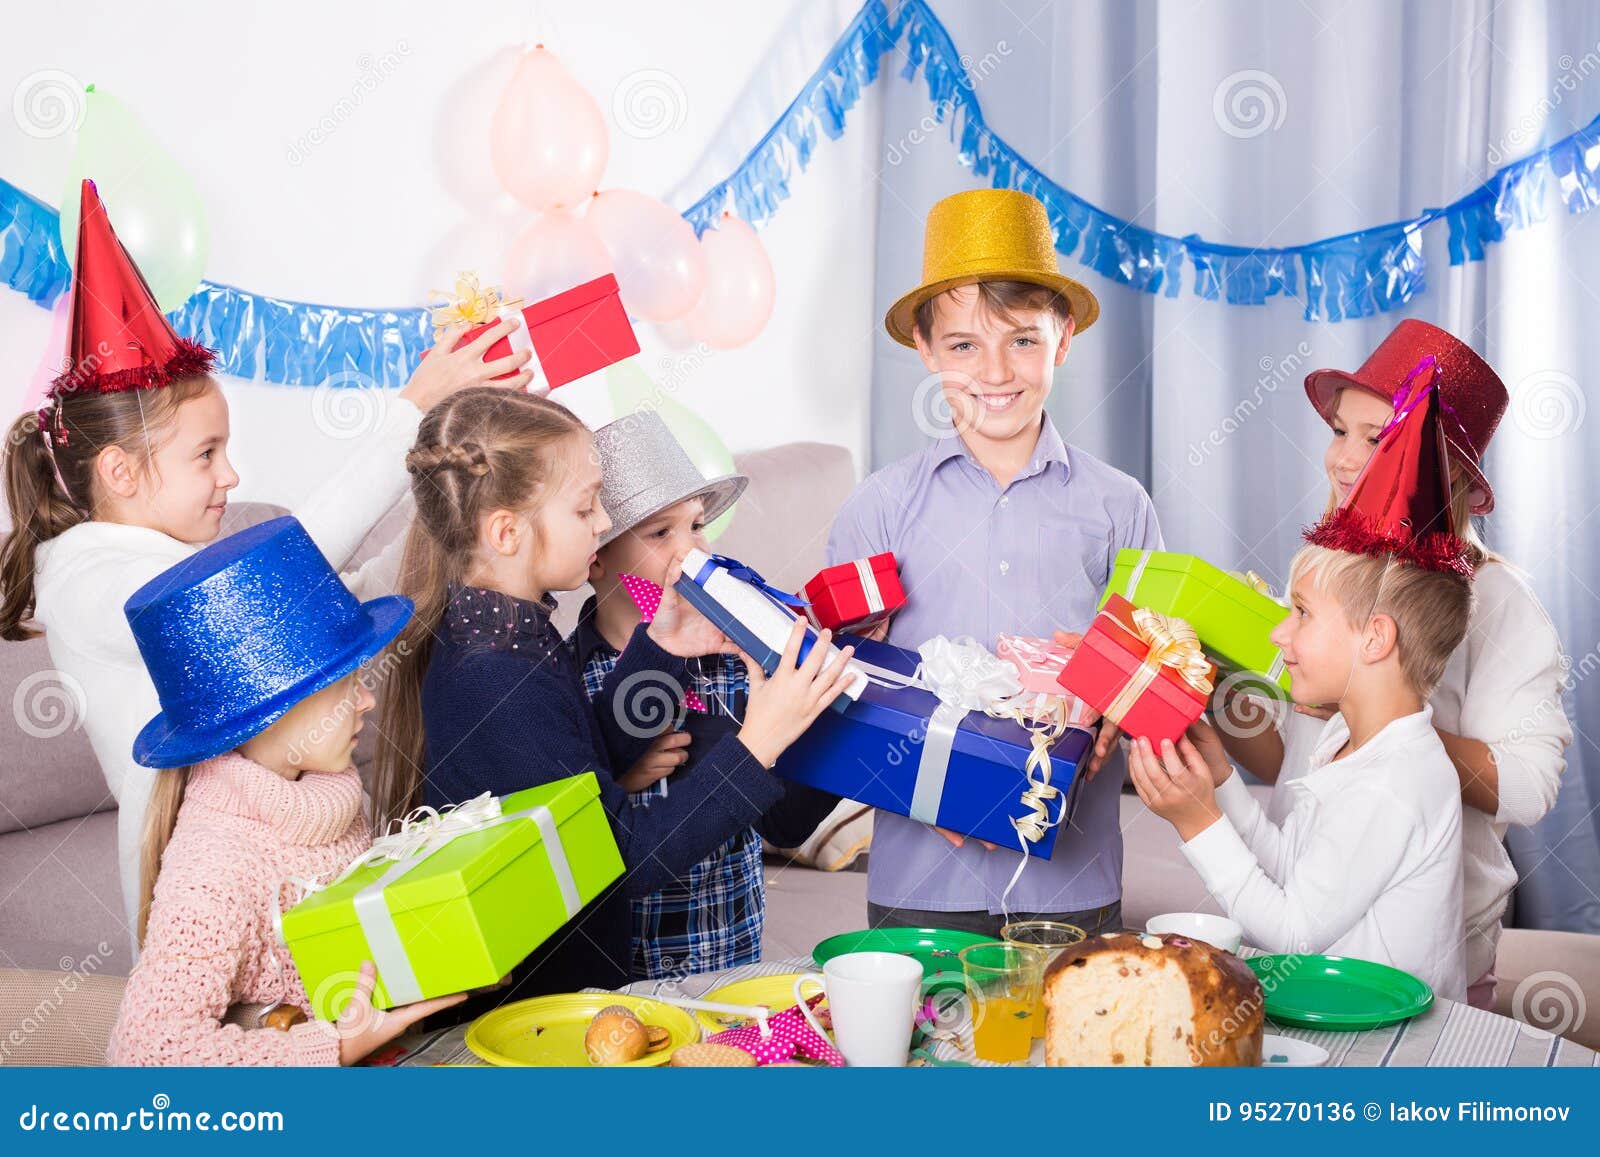 Cheerful Friends Handing Gifts To Birthday Boy Stock Photo - Image of ...